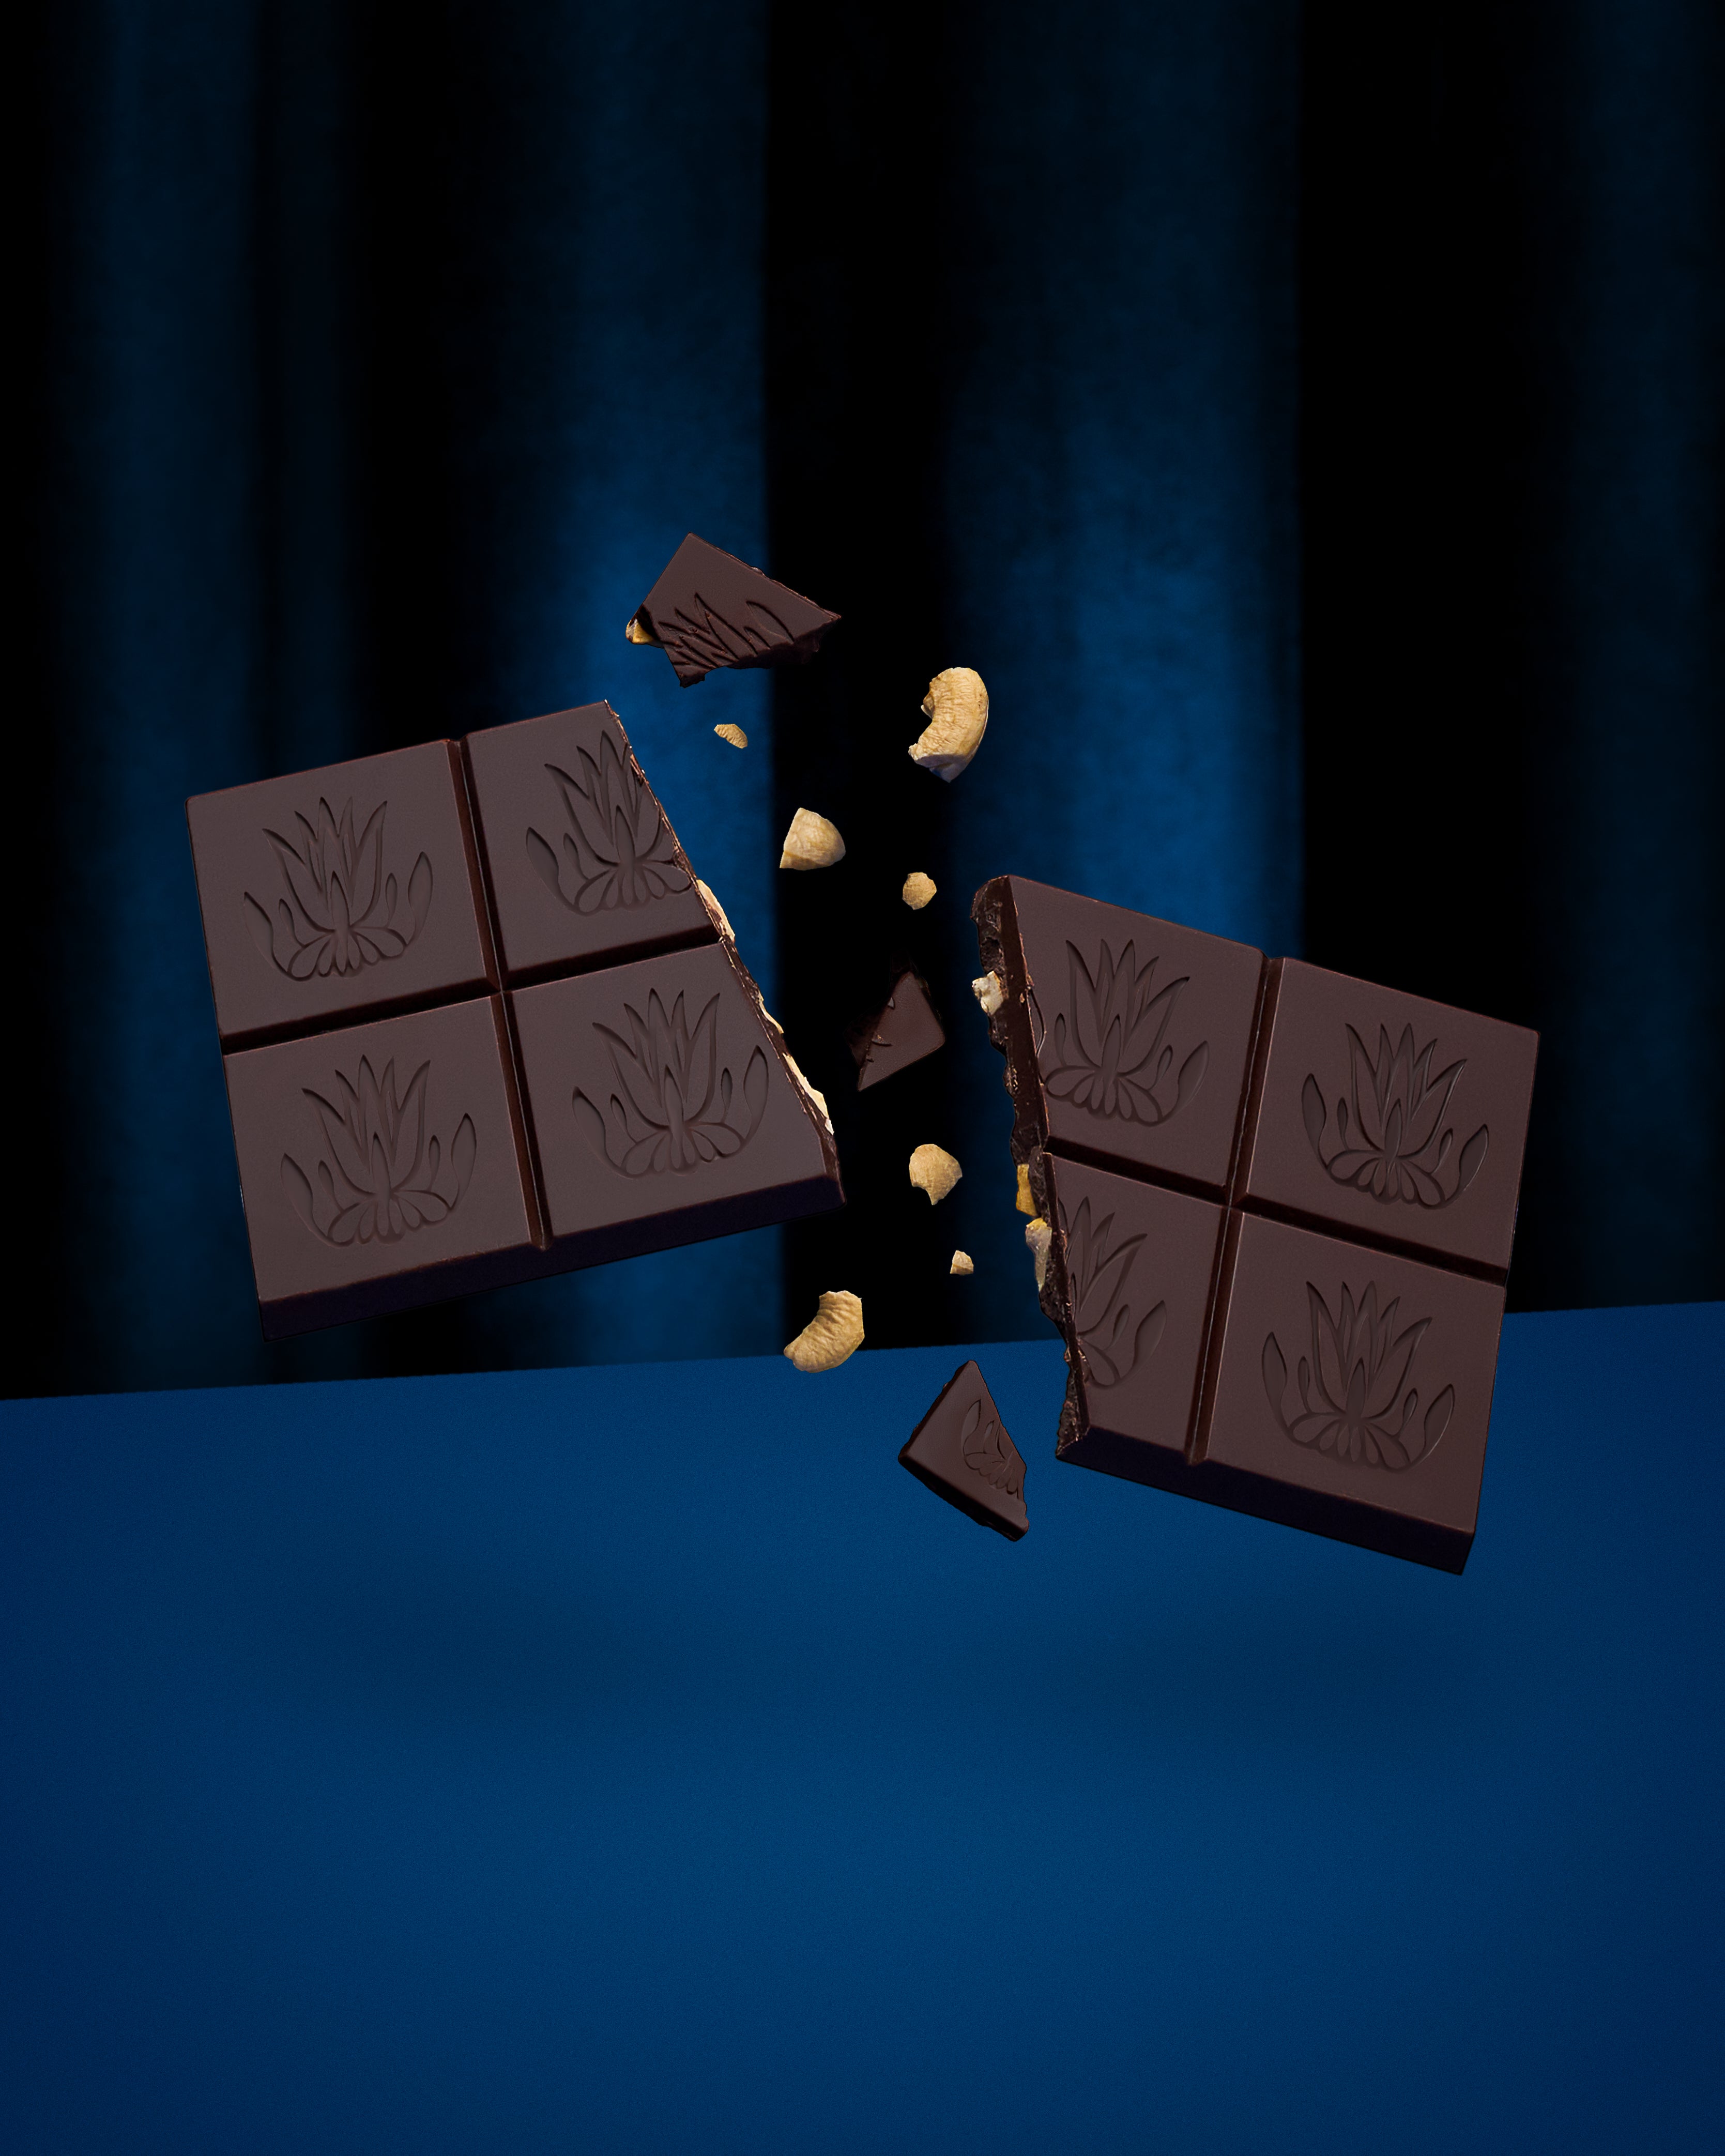 Discover pure delight in our expertly crafted artisanal chocolate bars. Immerse yourself in the exquisite blend of rich flavors and unparalleled craftsmanship. Elevate your senses with each bite. Explore the world of Sorga Chocolate today